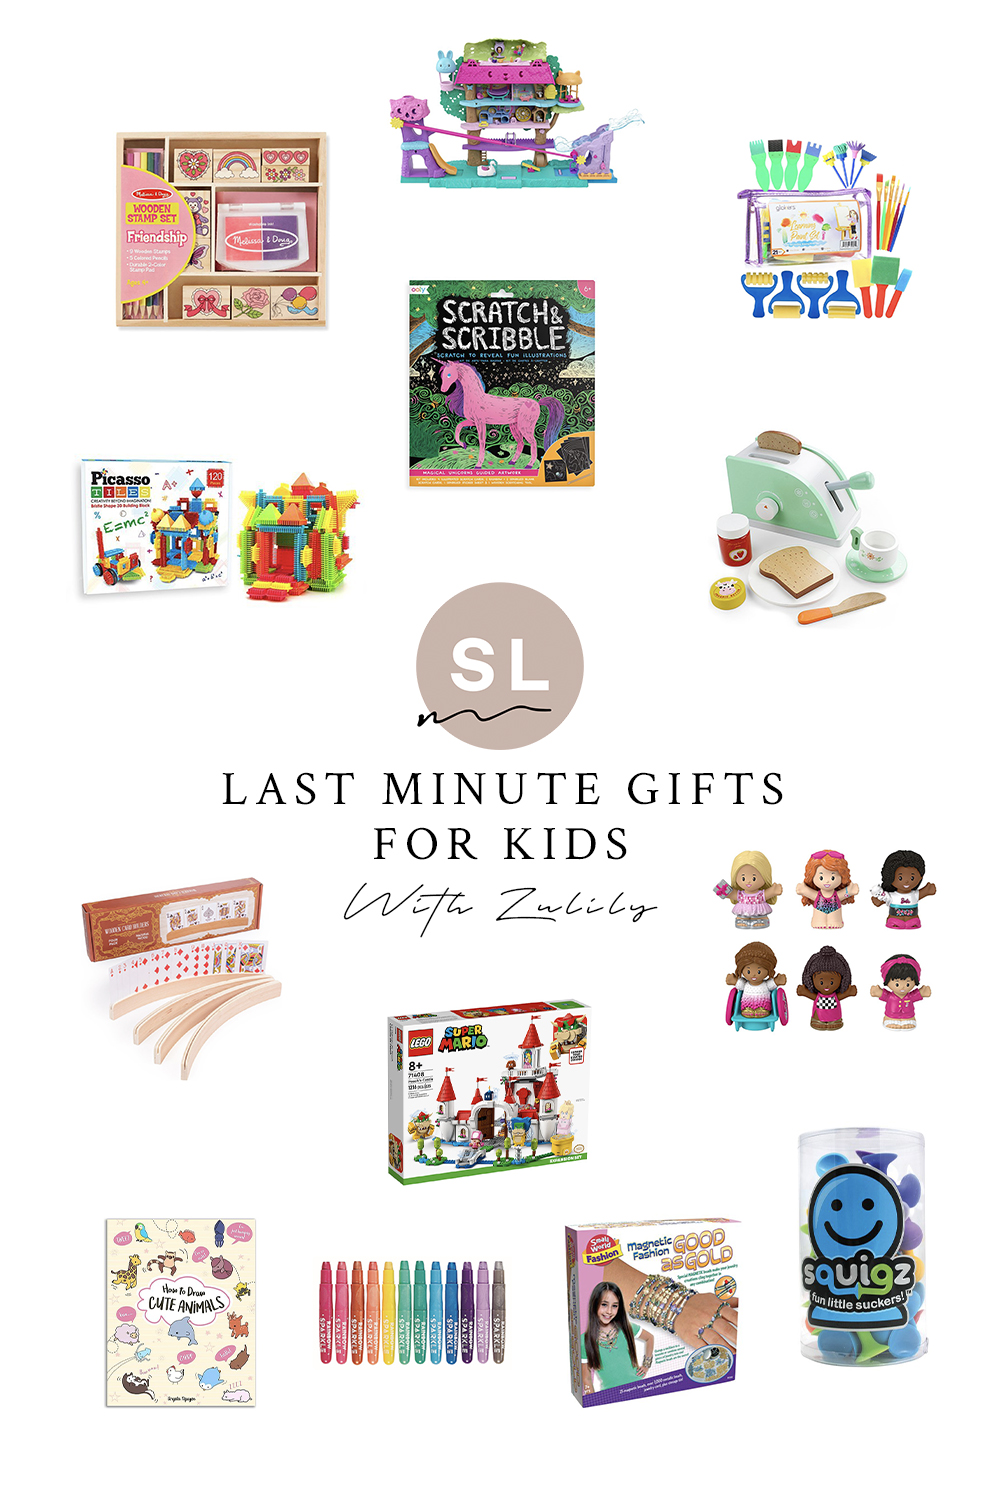 Last Minute Gifts for Kids with Zulily